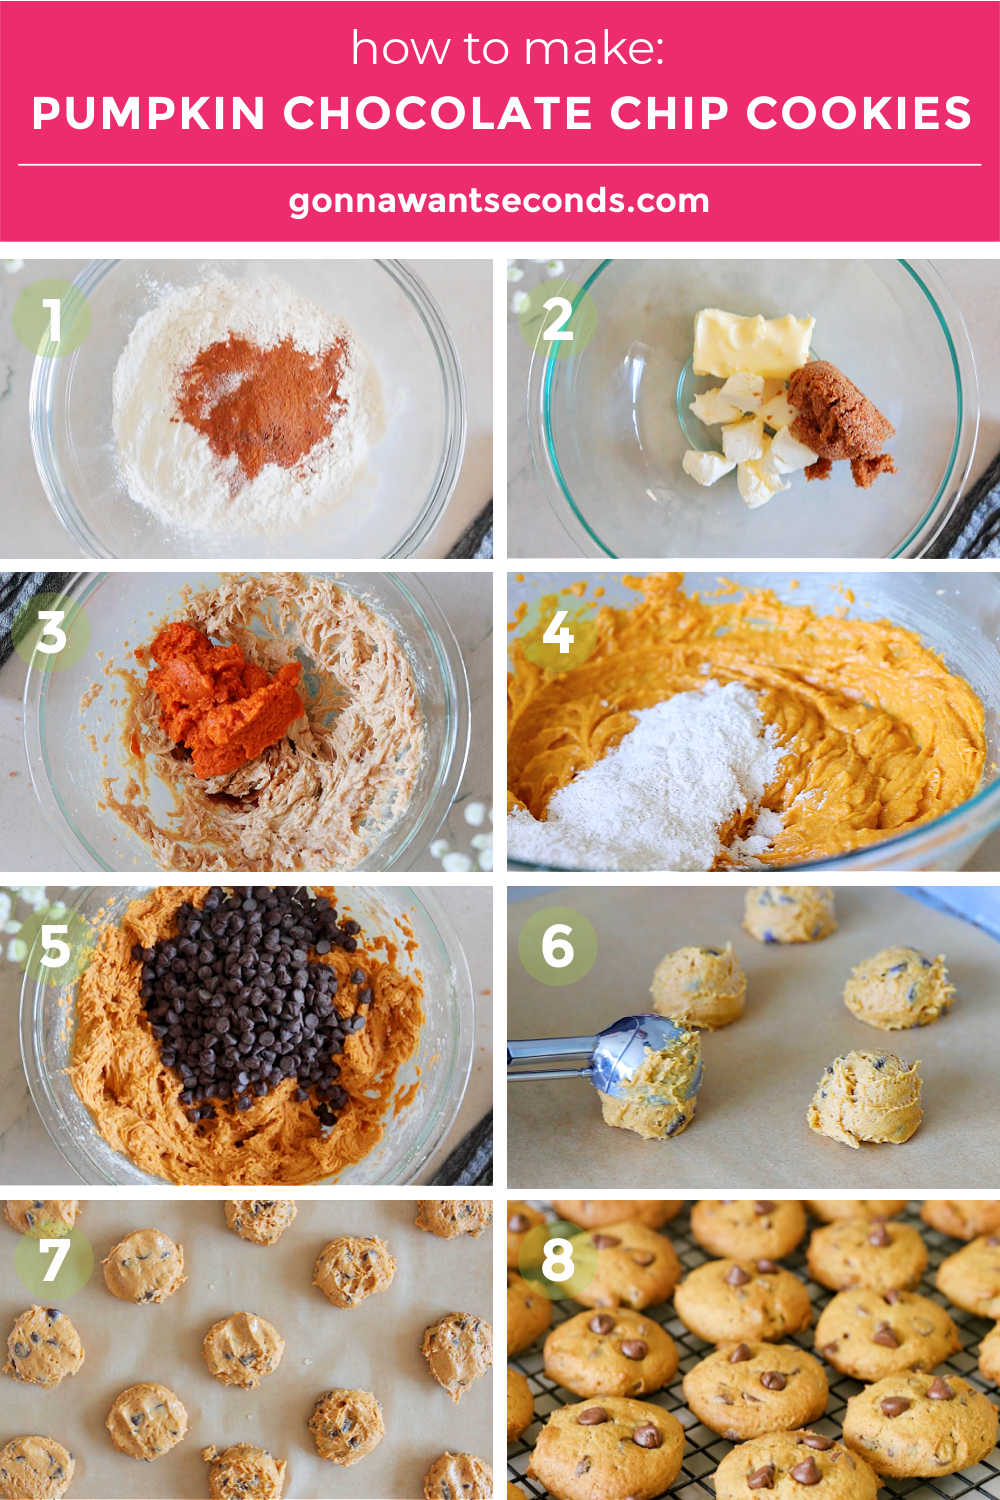 Step by step how to make pumpkin chocolate chip cookies